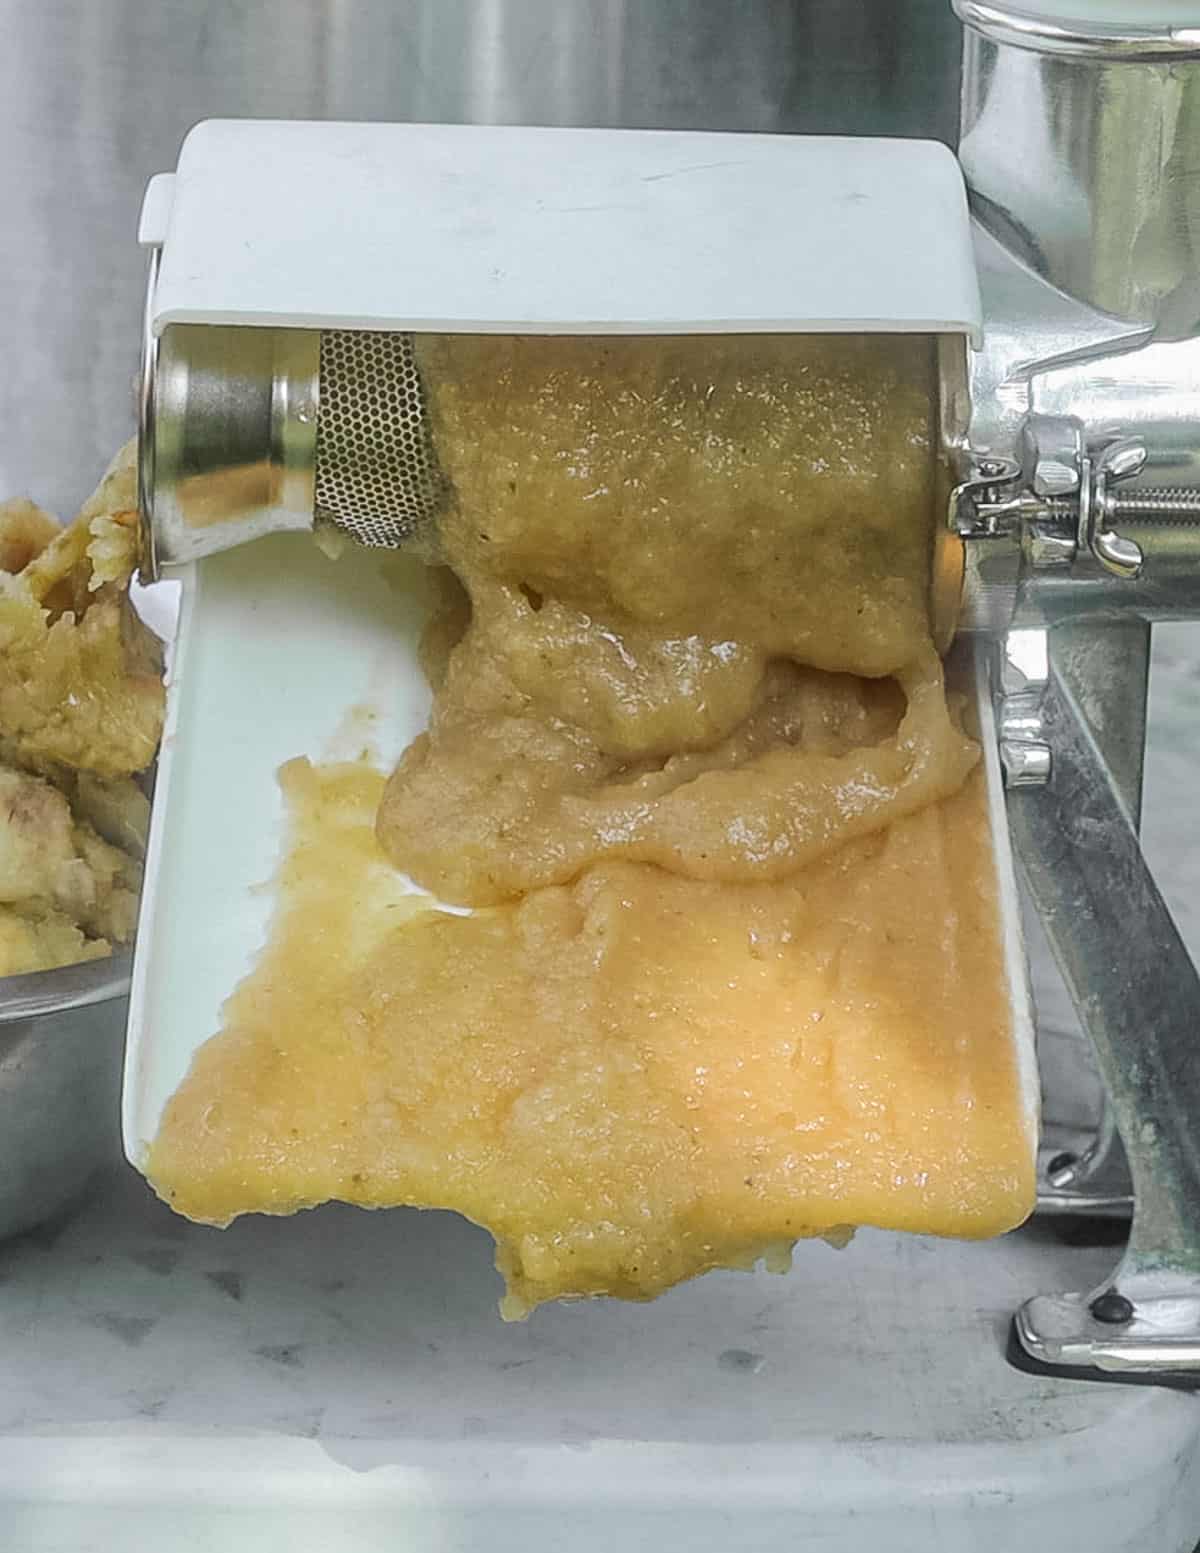 Apple sauce coming out of an apple sauce maker.